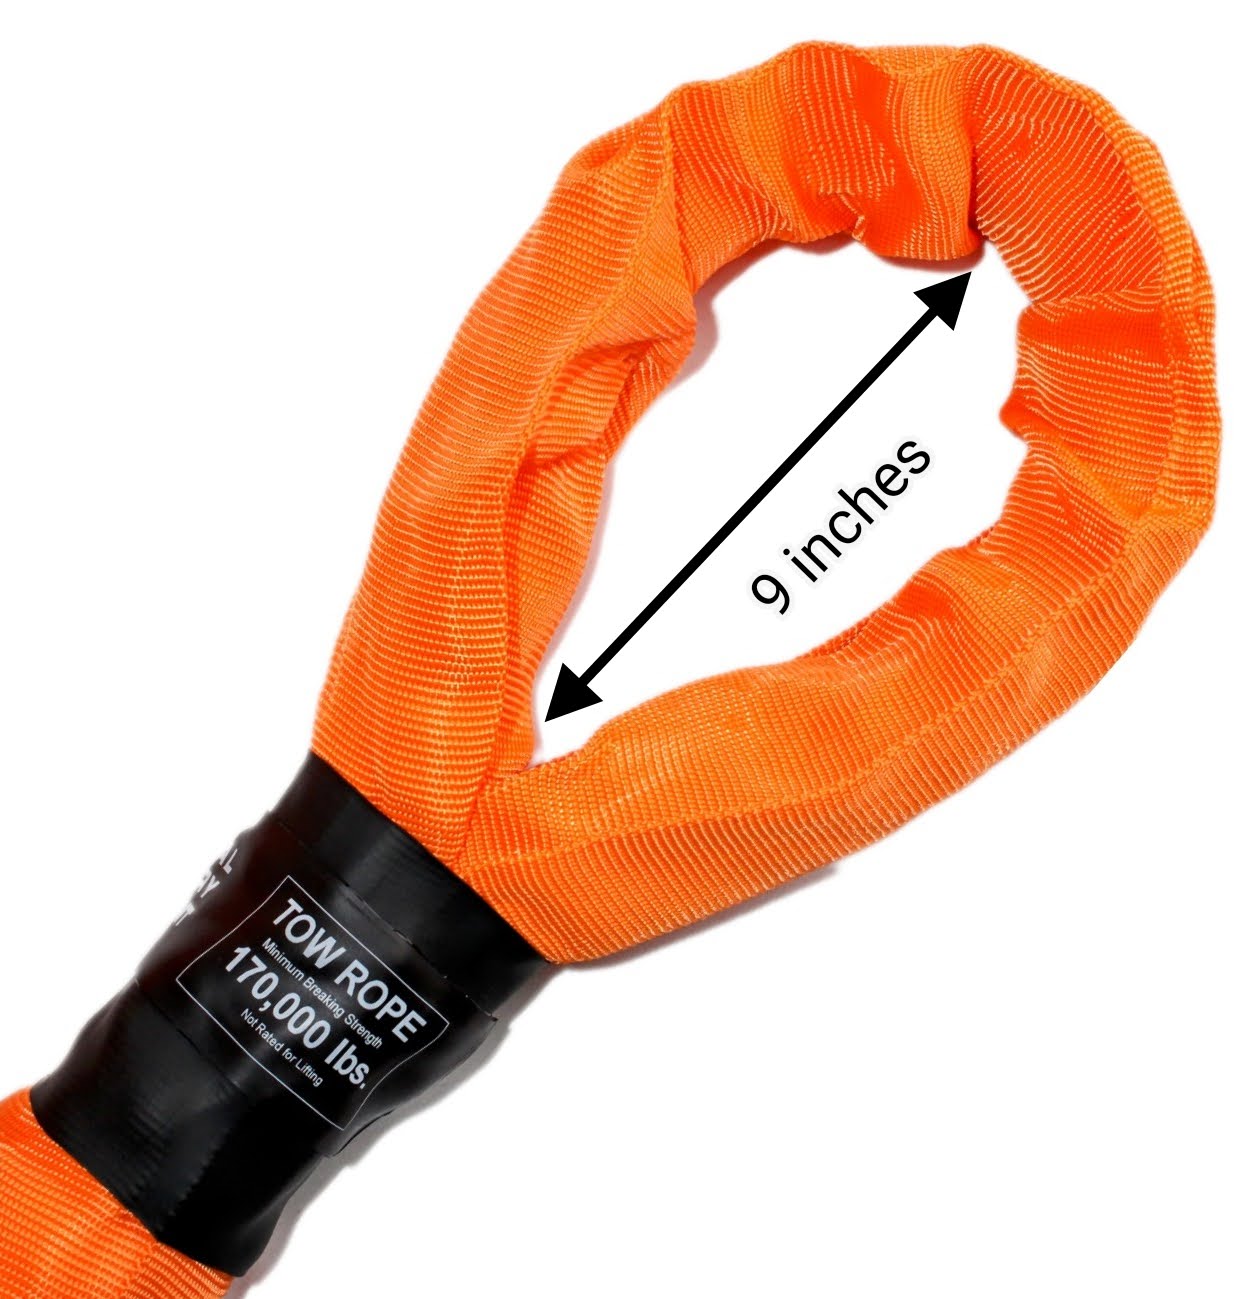 Industrial Tow Rope - 170,000 lb. Breaking Strength